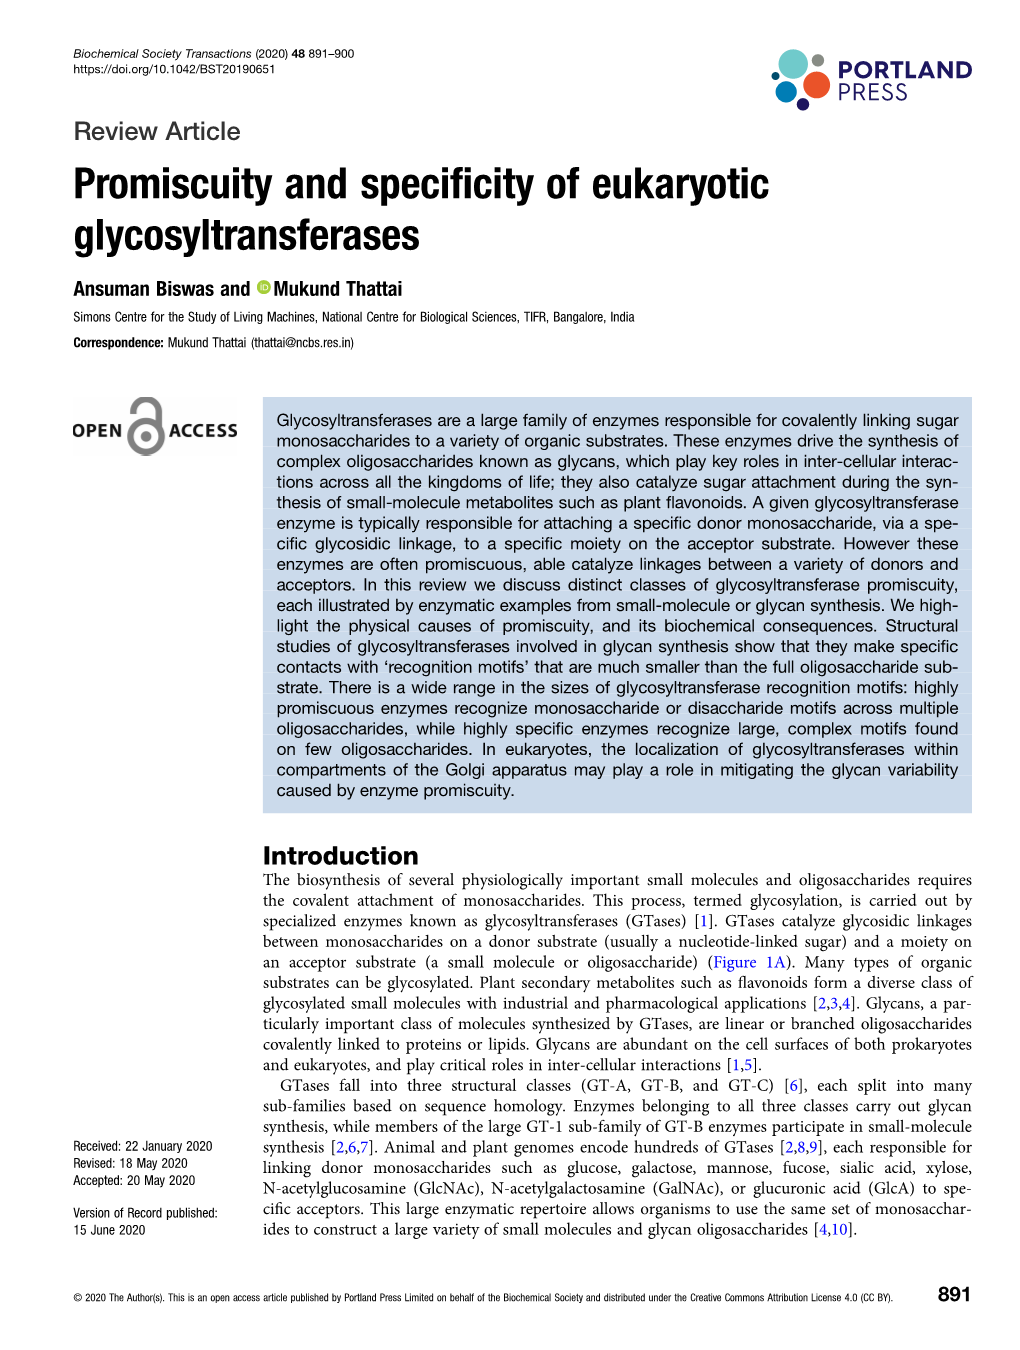 Promiscuity and Specificity of Eukaryotic Glycosyltransferases